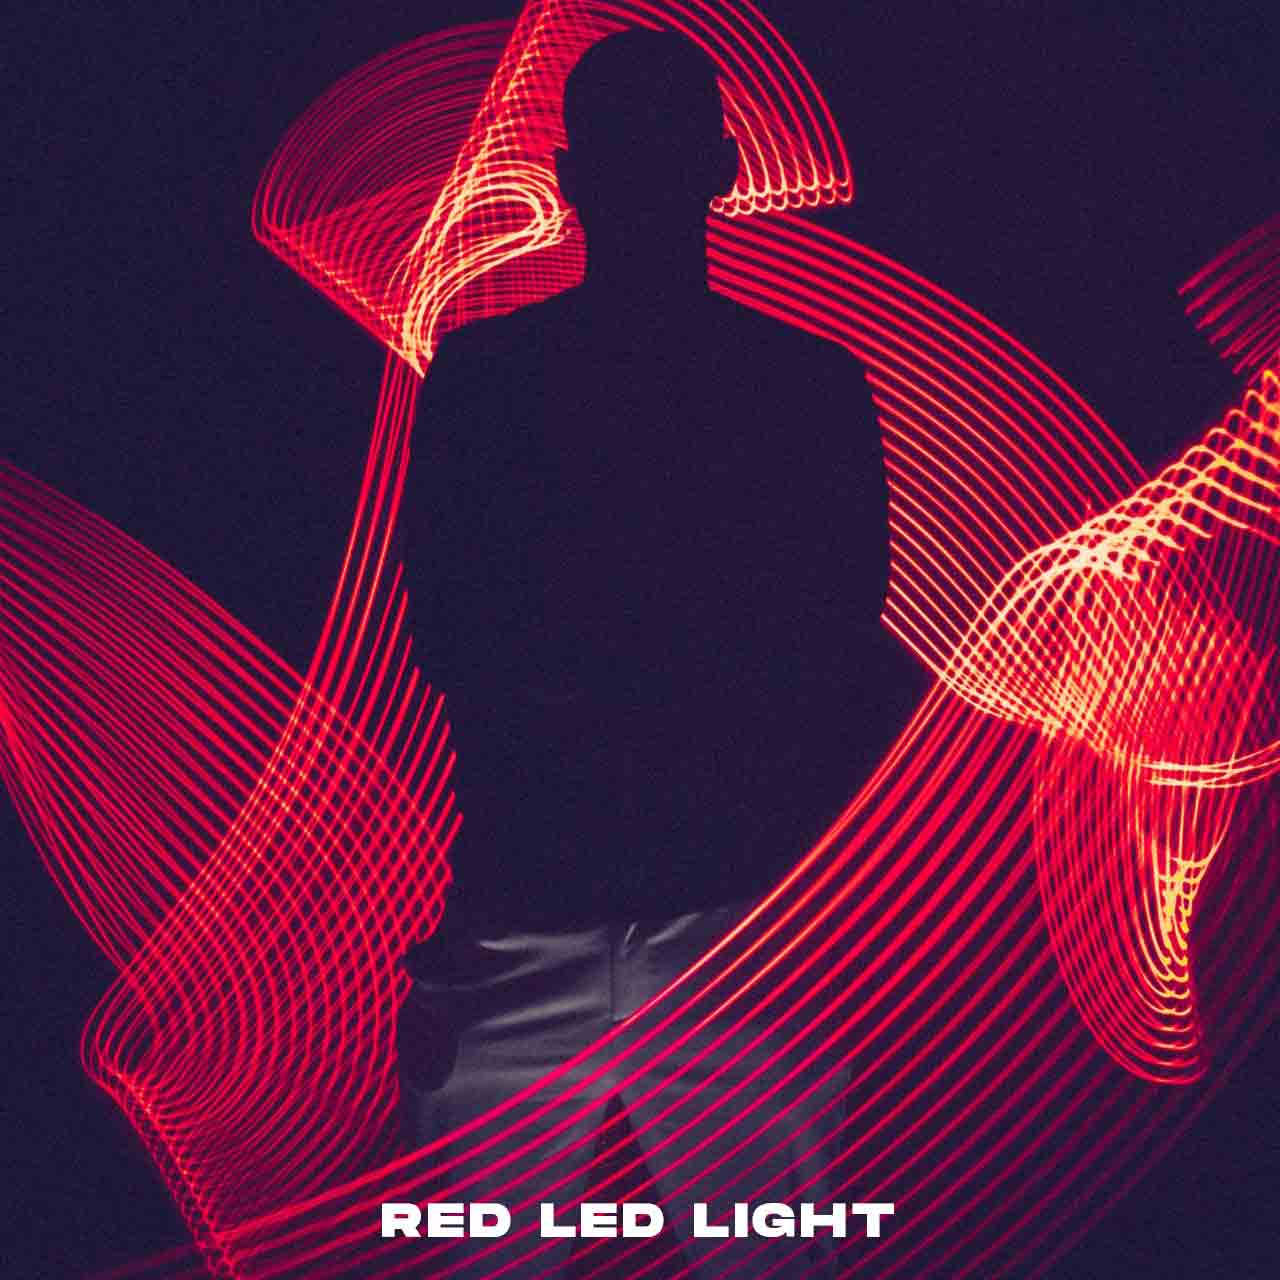 red-led-light-with-silhouette-of-a-man-3094799